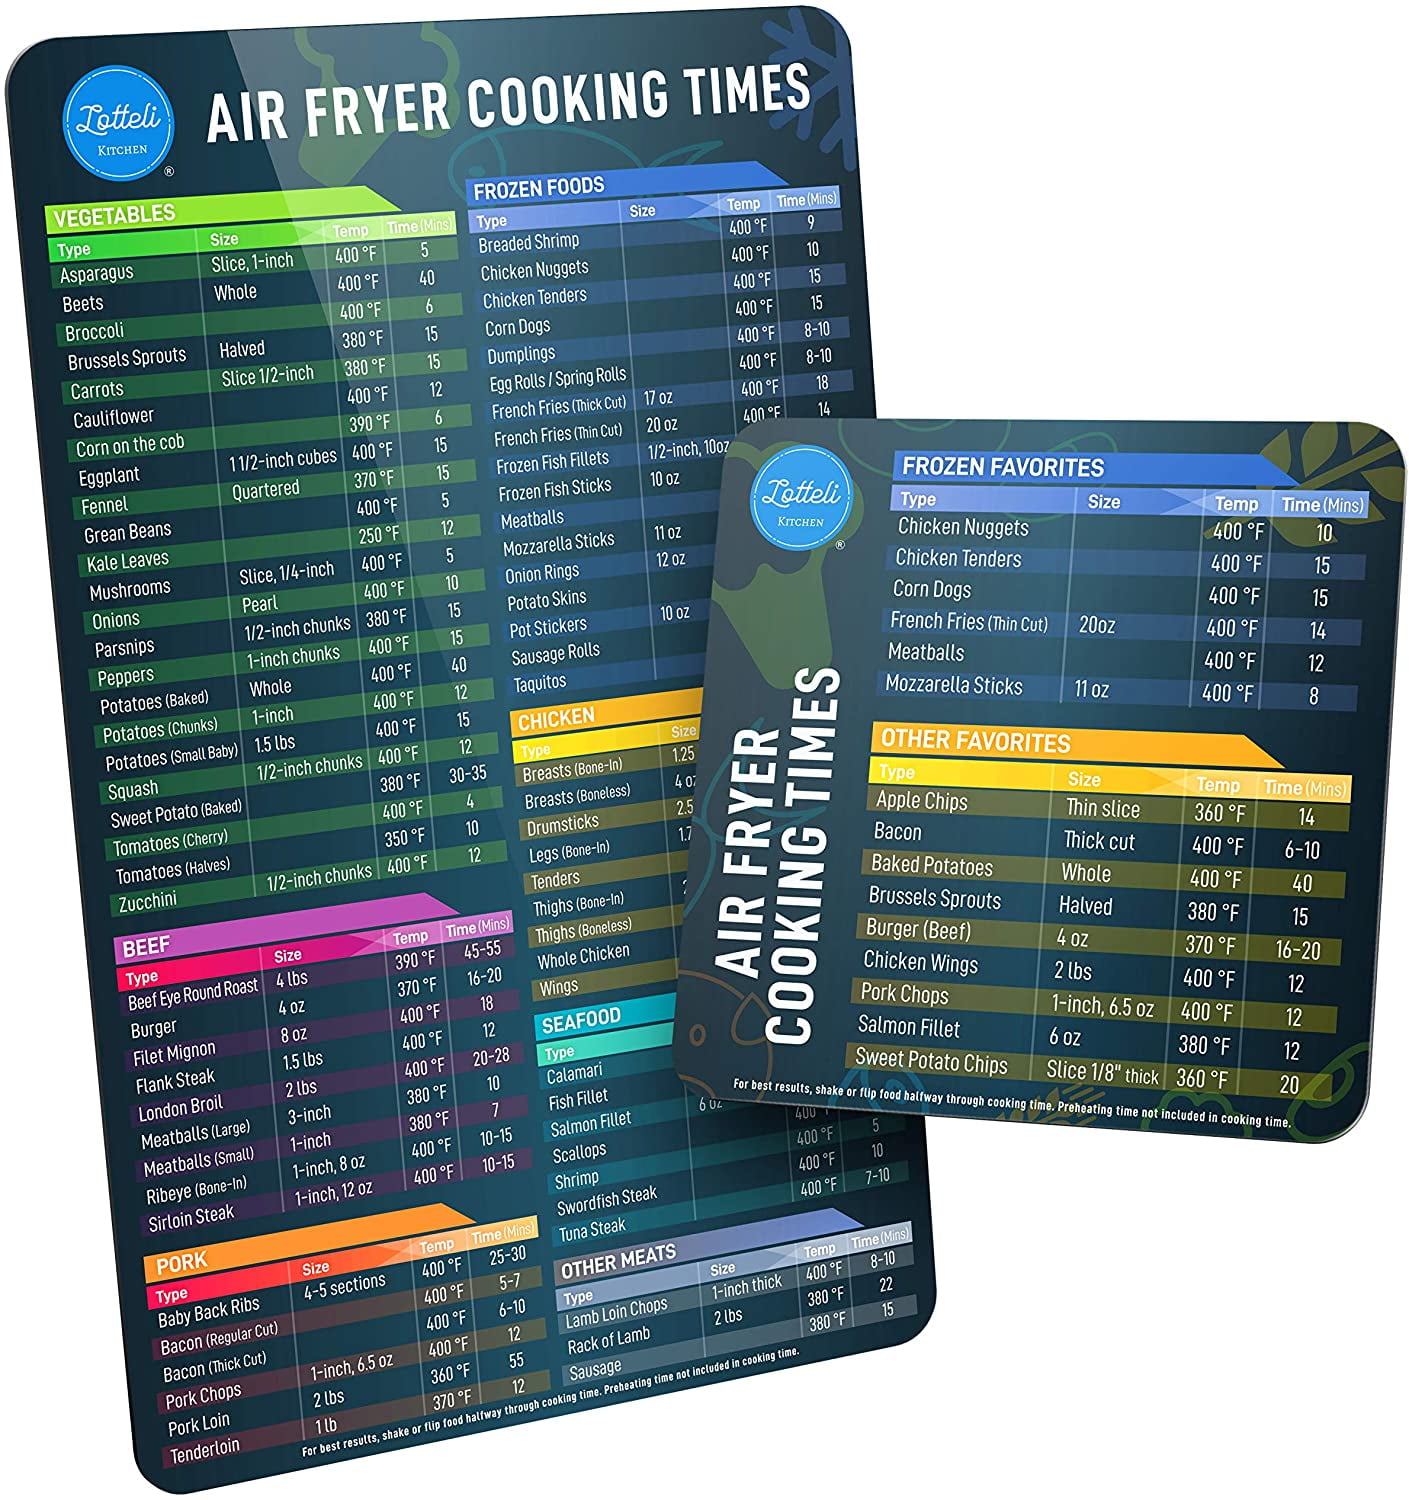 Air Fryer Cooking Times Chart Magnet - Extra Large Easy to Read Airfryer  Magnetic Cheat Sheet - Healthy